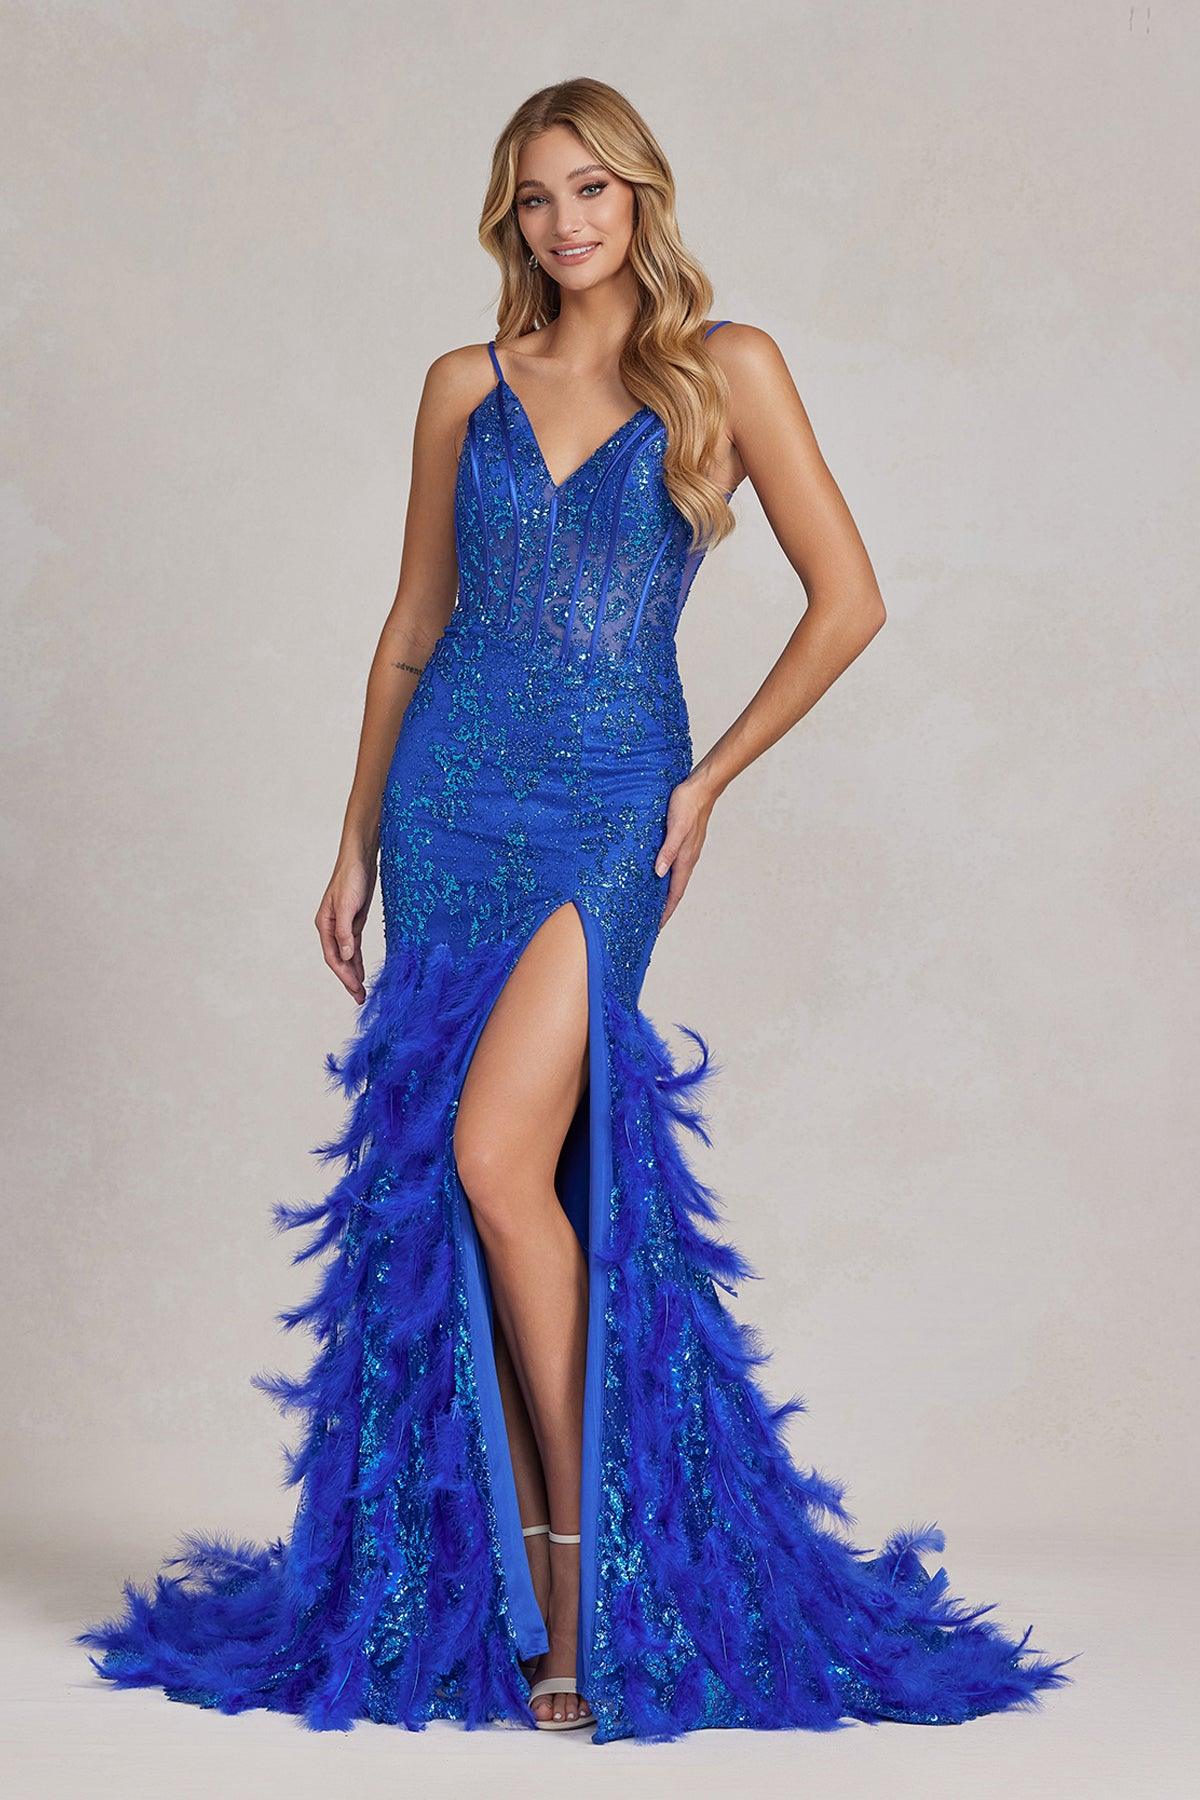 Nox Anabel C1119 Long Spaghetti Strap Sexy Prom Gown